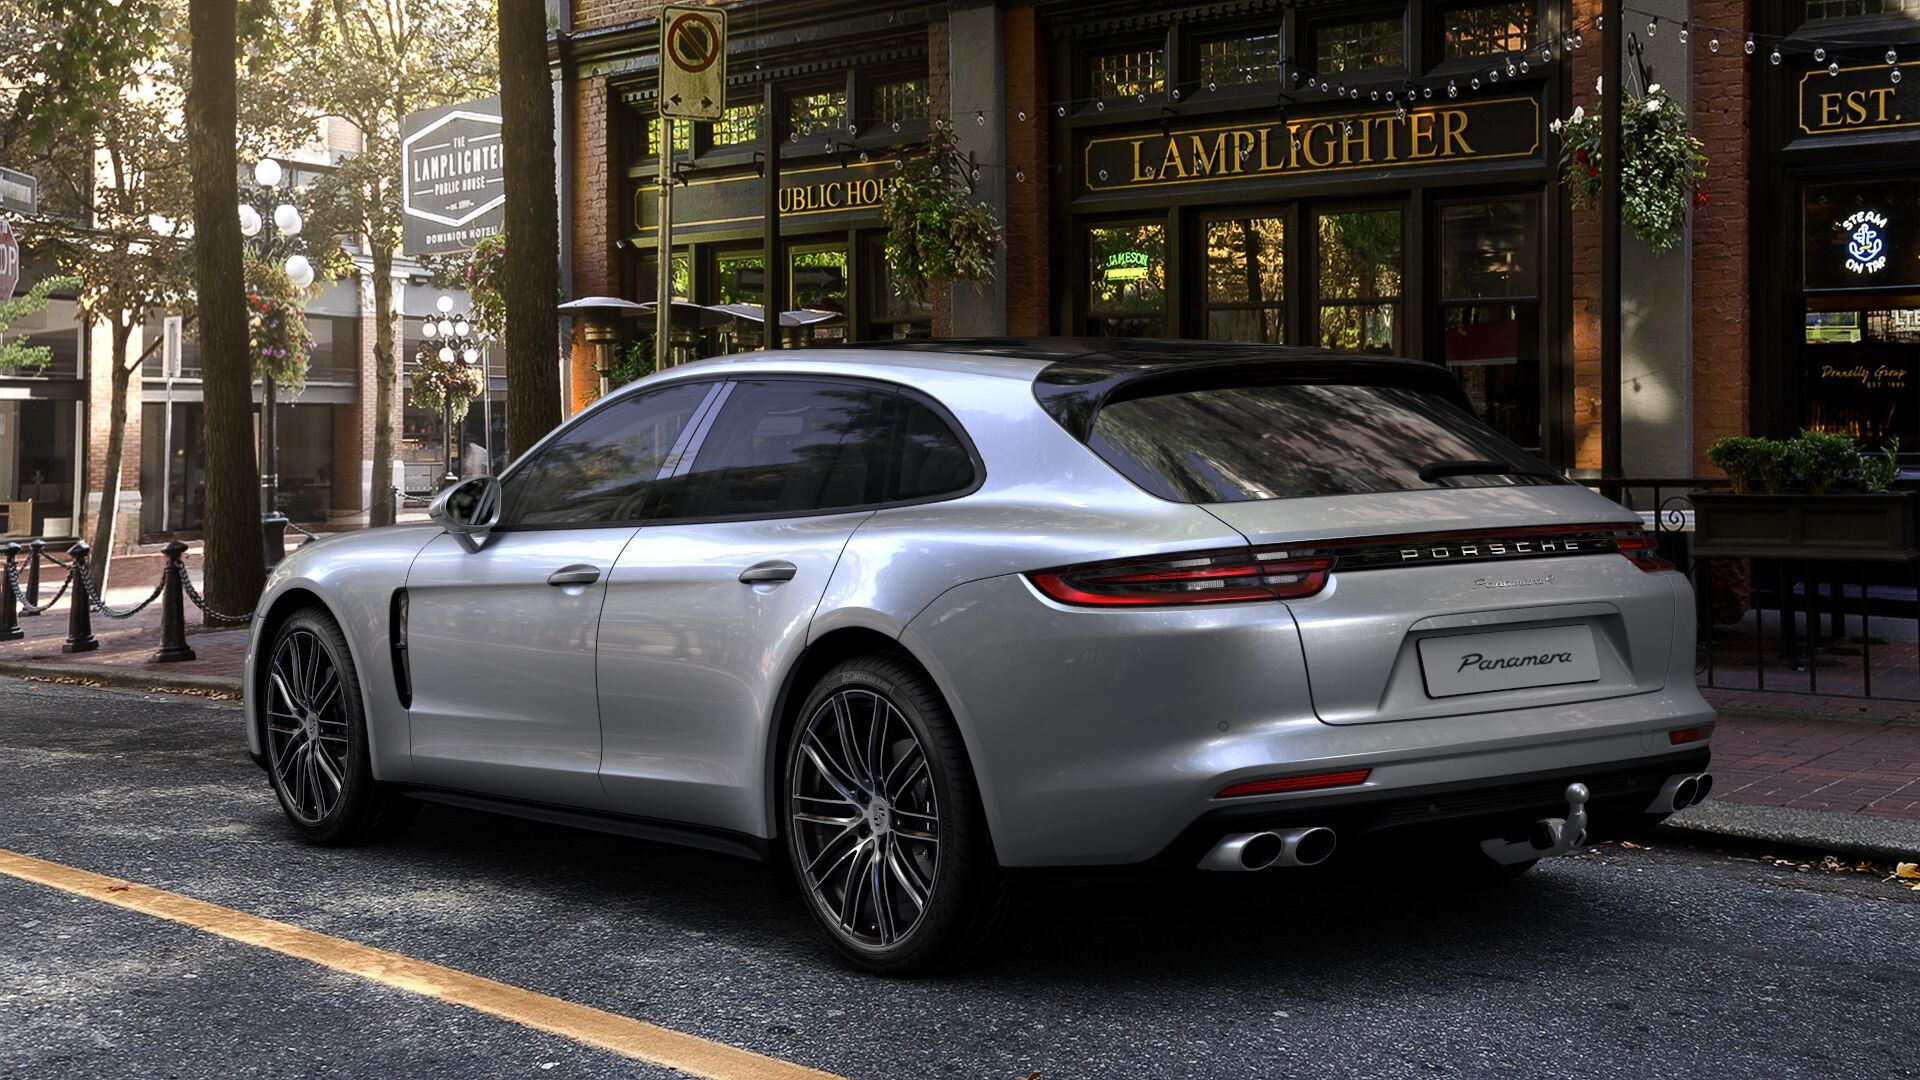 How Much Can The 2023 Porsche Panamera Tow?